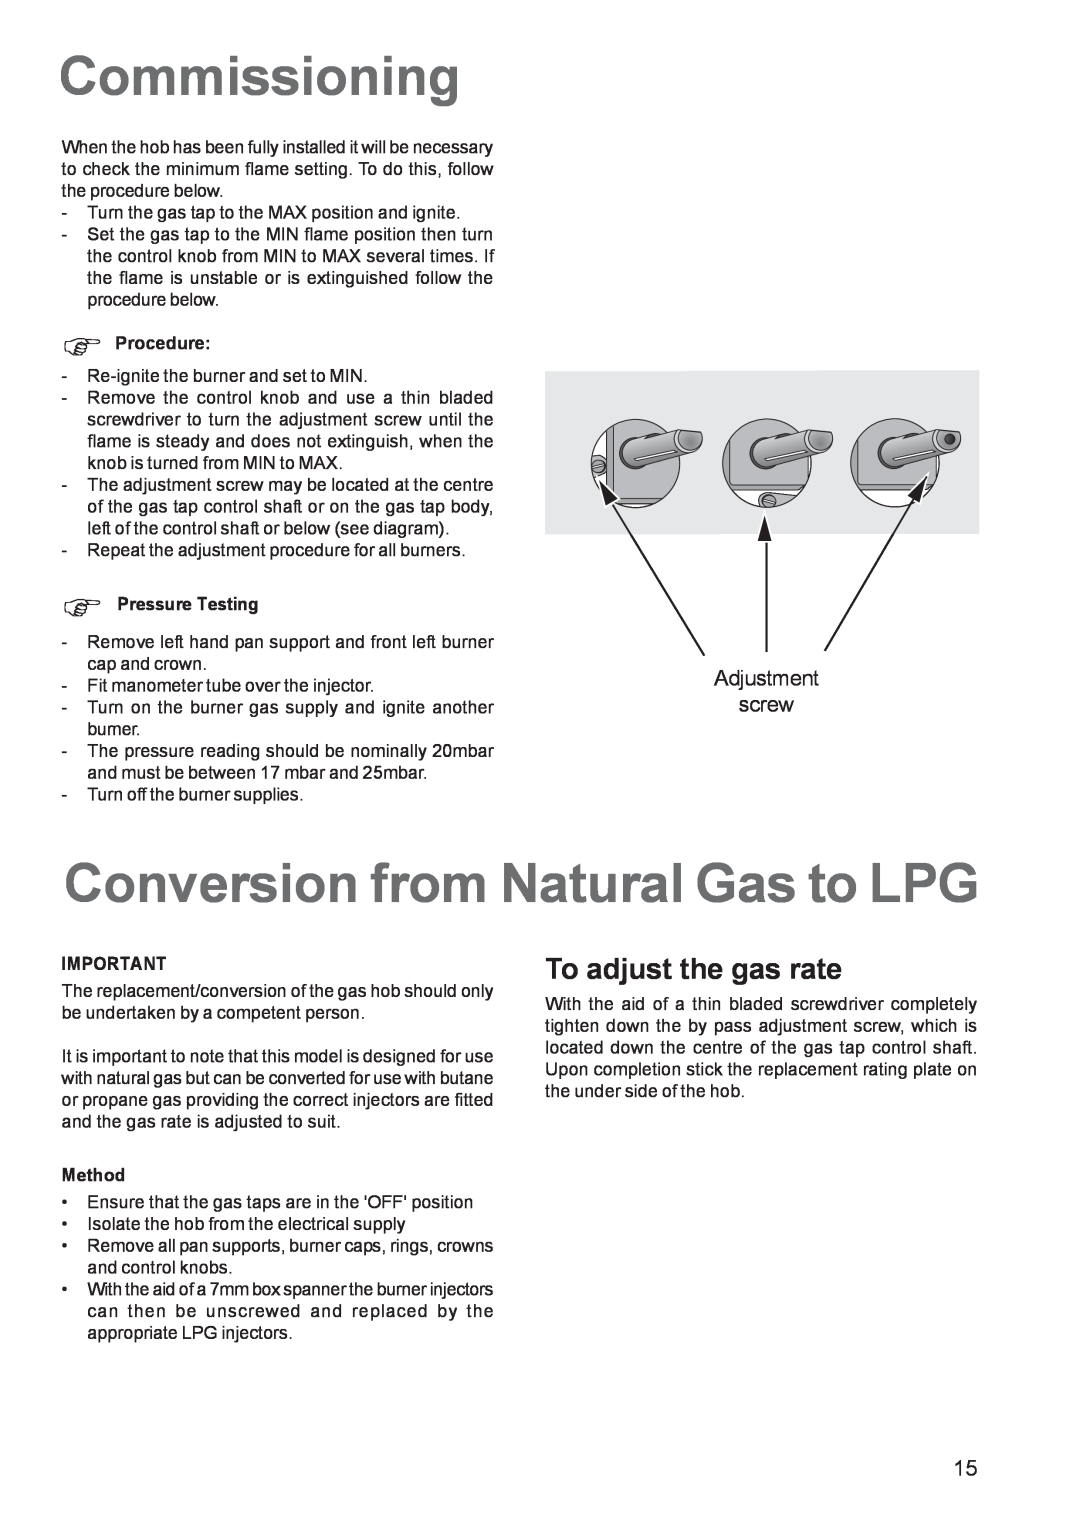 Electrolux EHG 6762 manual Commissioning, Conversion from Natural Gas to LPG, To adjust the gas rate, Adjustment screw 